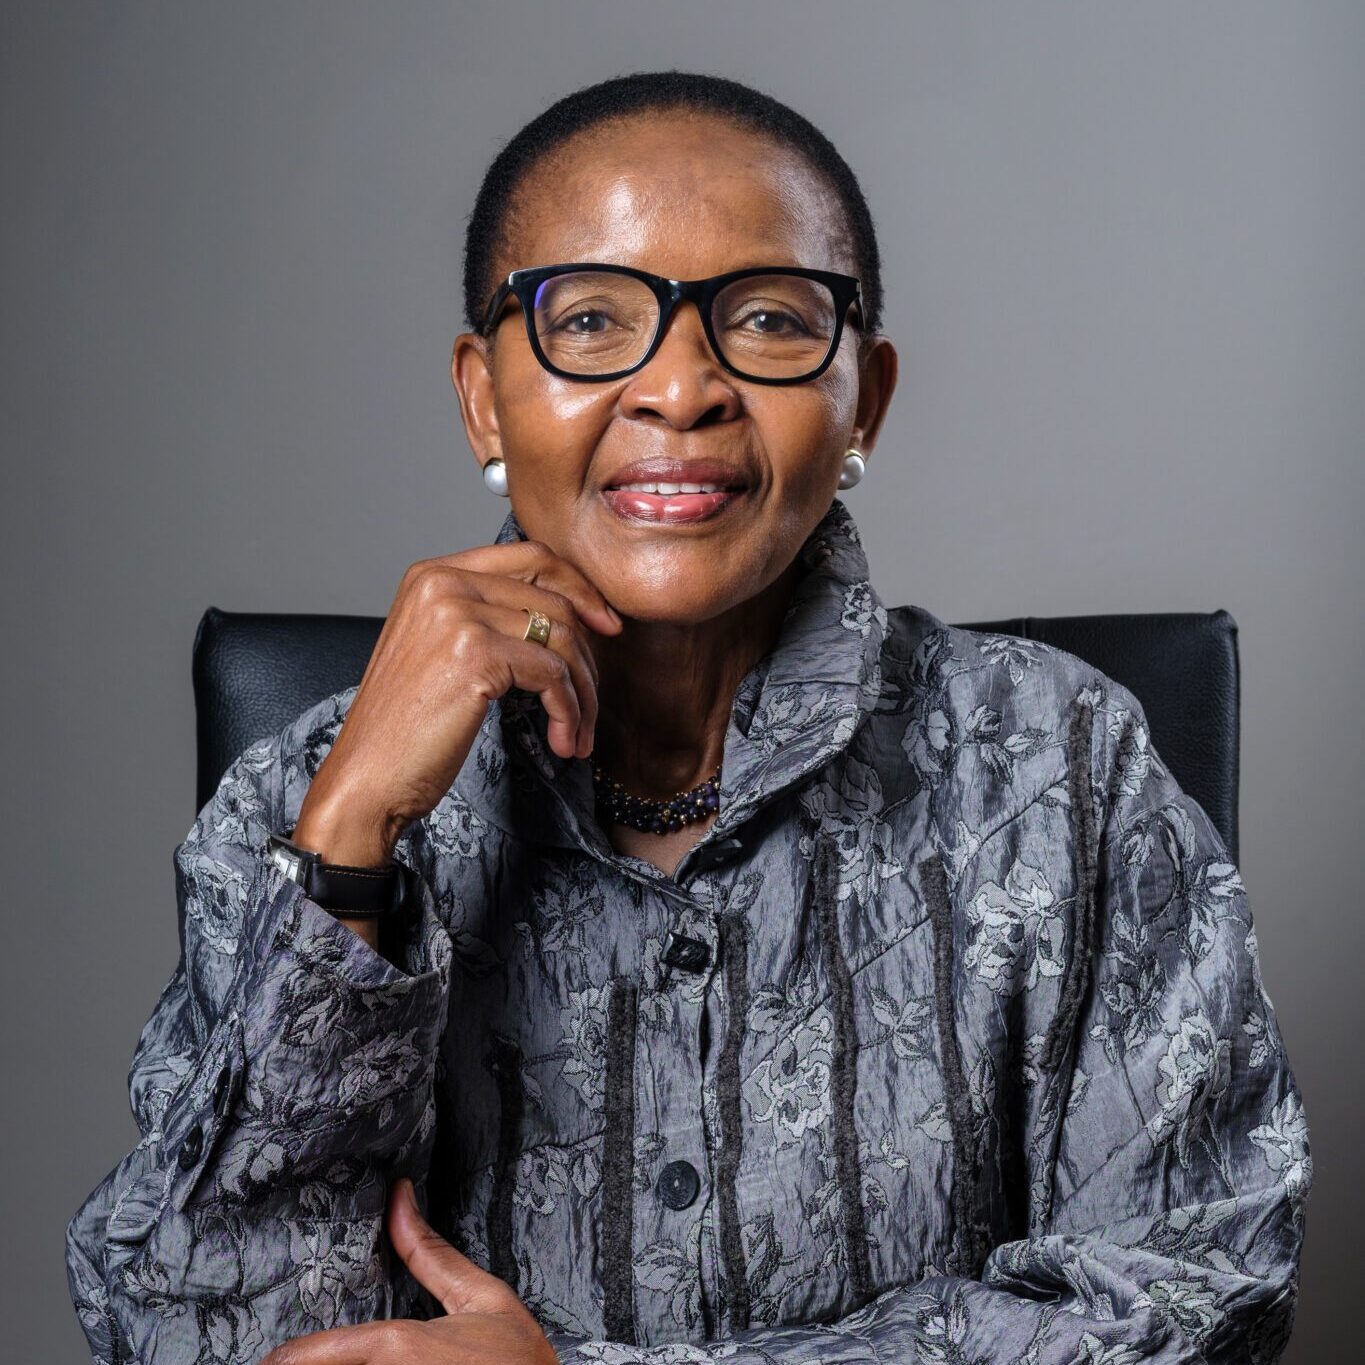 2024 Templeton Prize Winner Pumla Gobodo-Madikizela photographed in Cape Town, South Africa by Stefan Els for the Templeton Prize